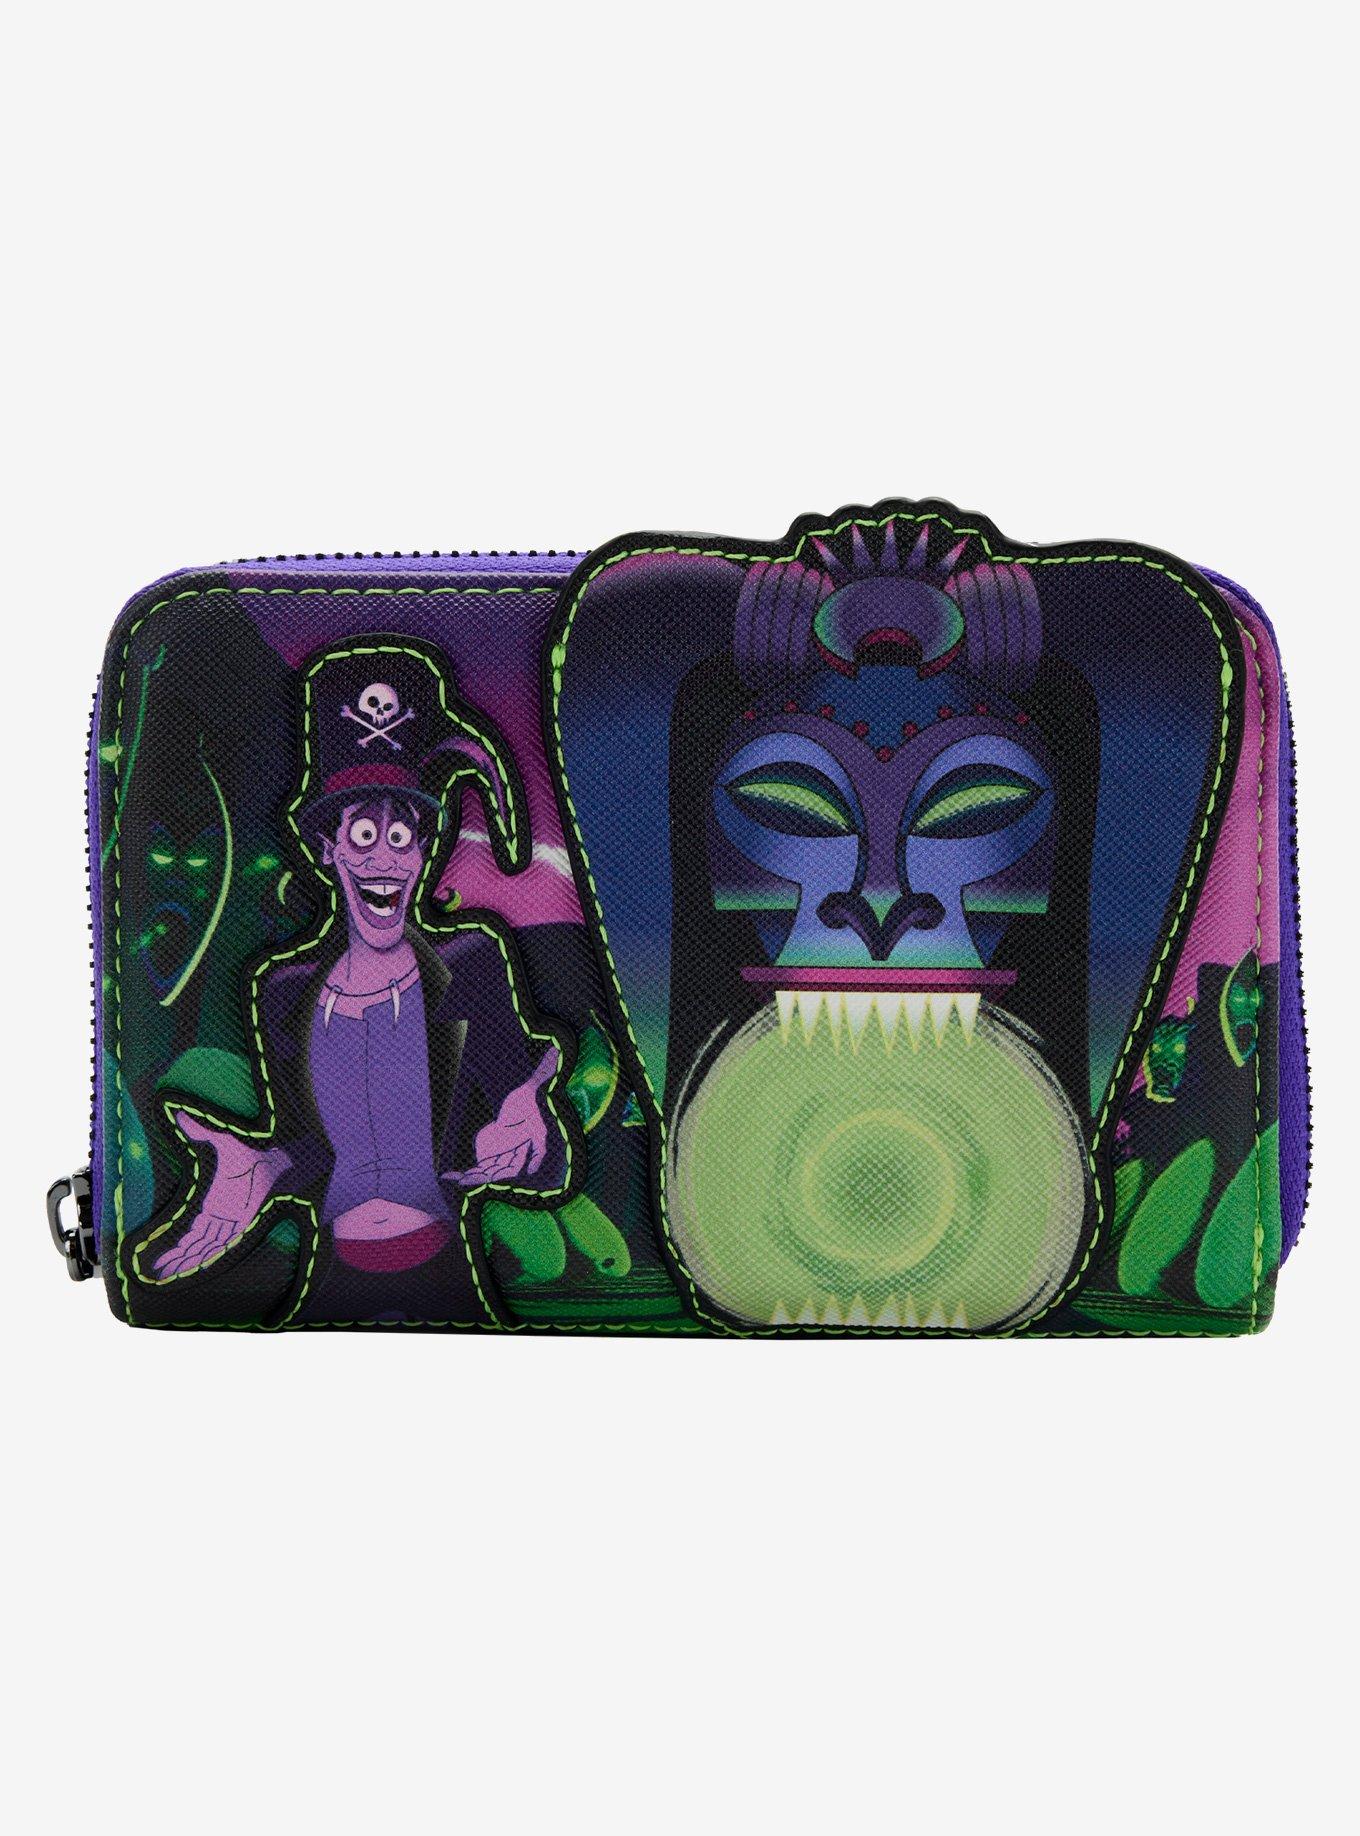 Loungefly Disney The Princess and The Frog Dr. Facilier Glow-in-the-Dark Zipper Wallet